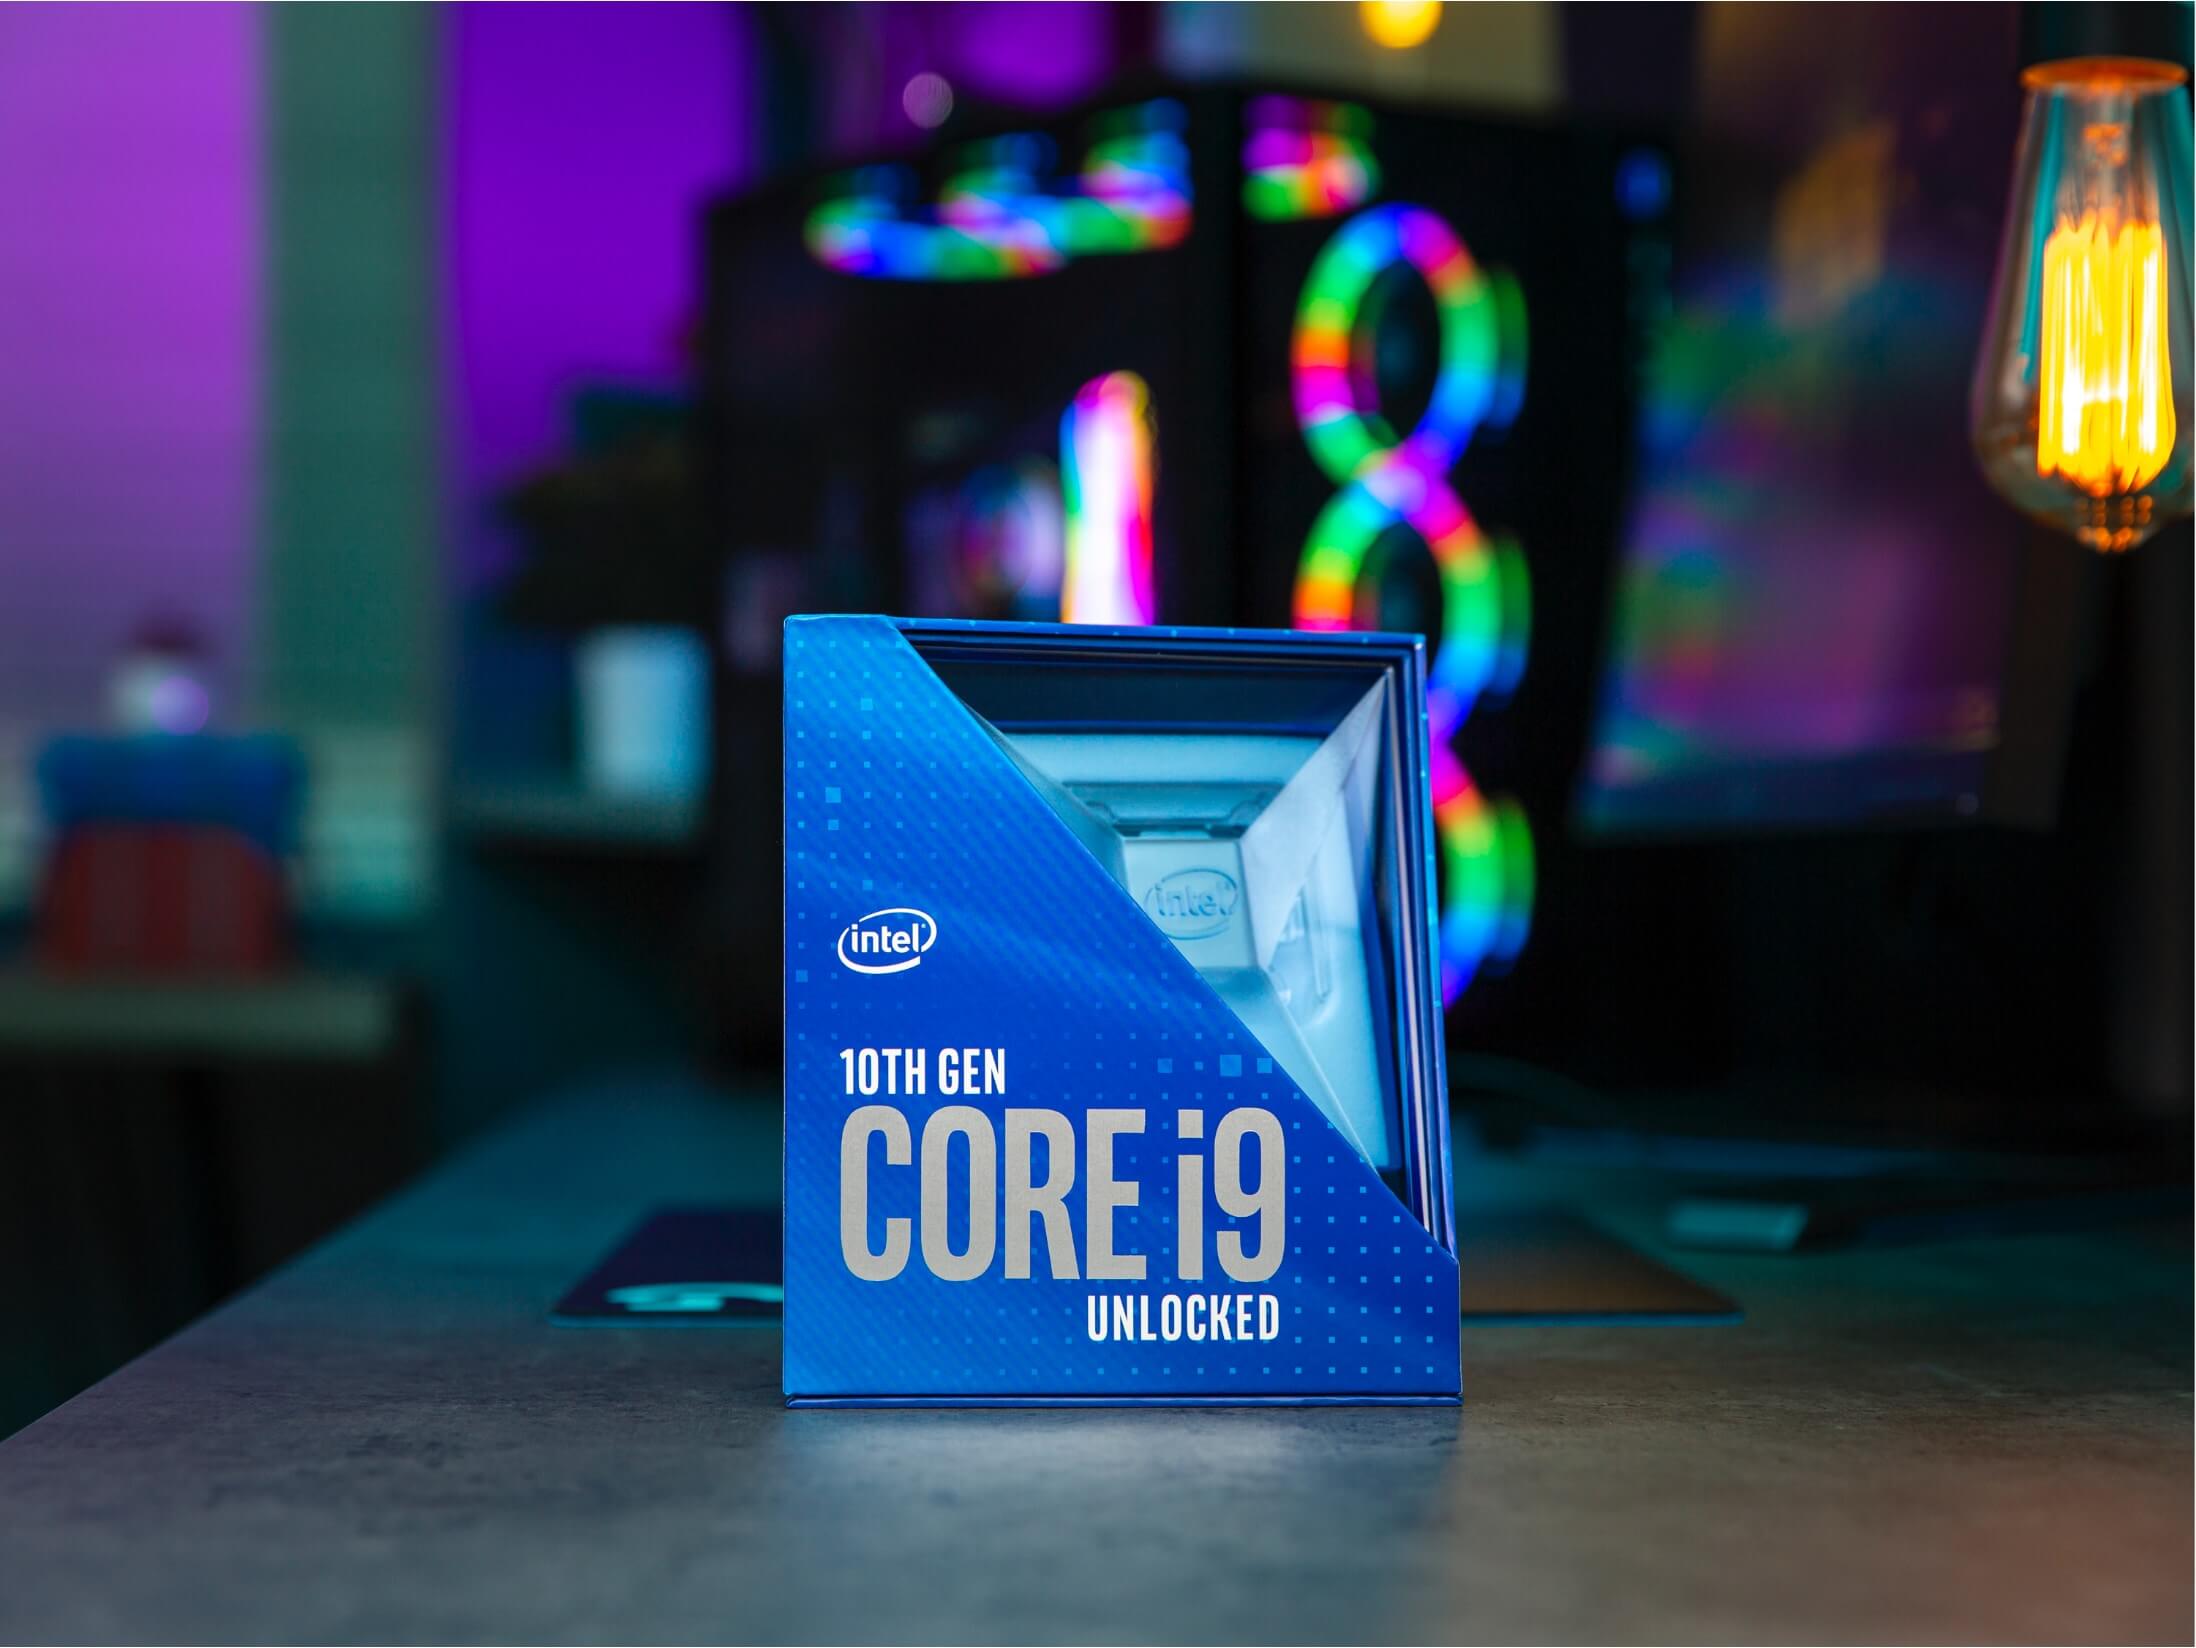 Intel Core i9-10900K is official, boosting up to 5.3 GHz; Core i7 and